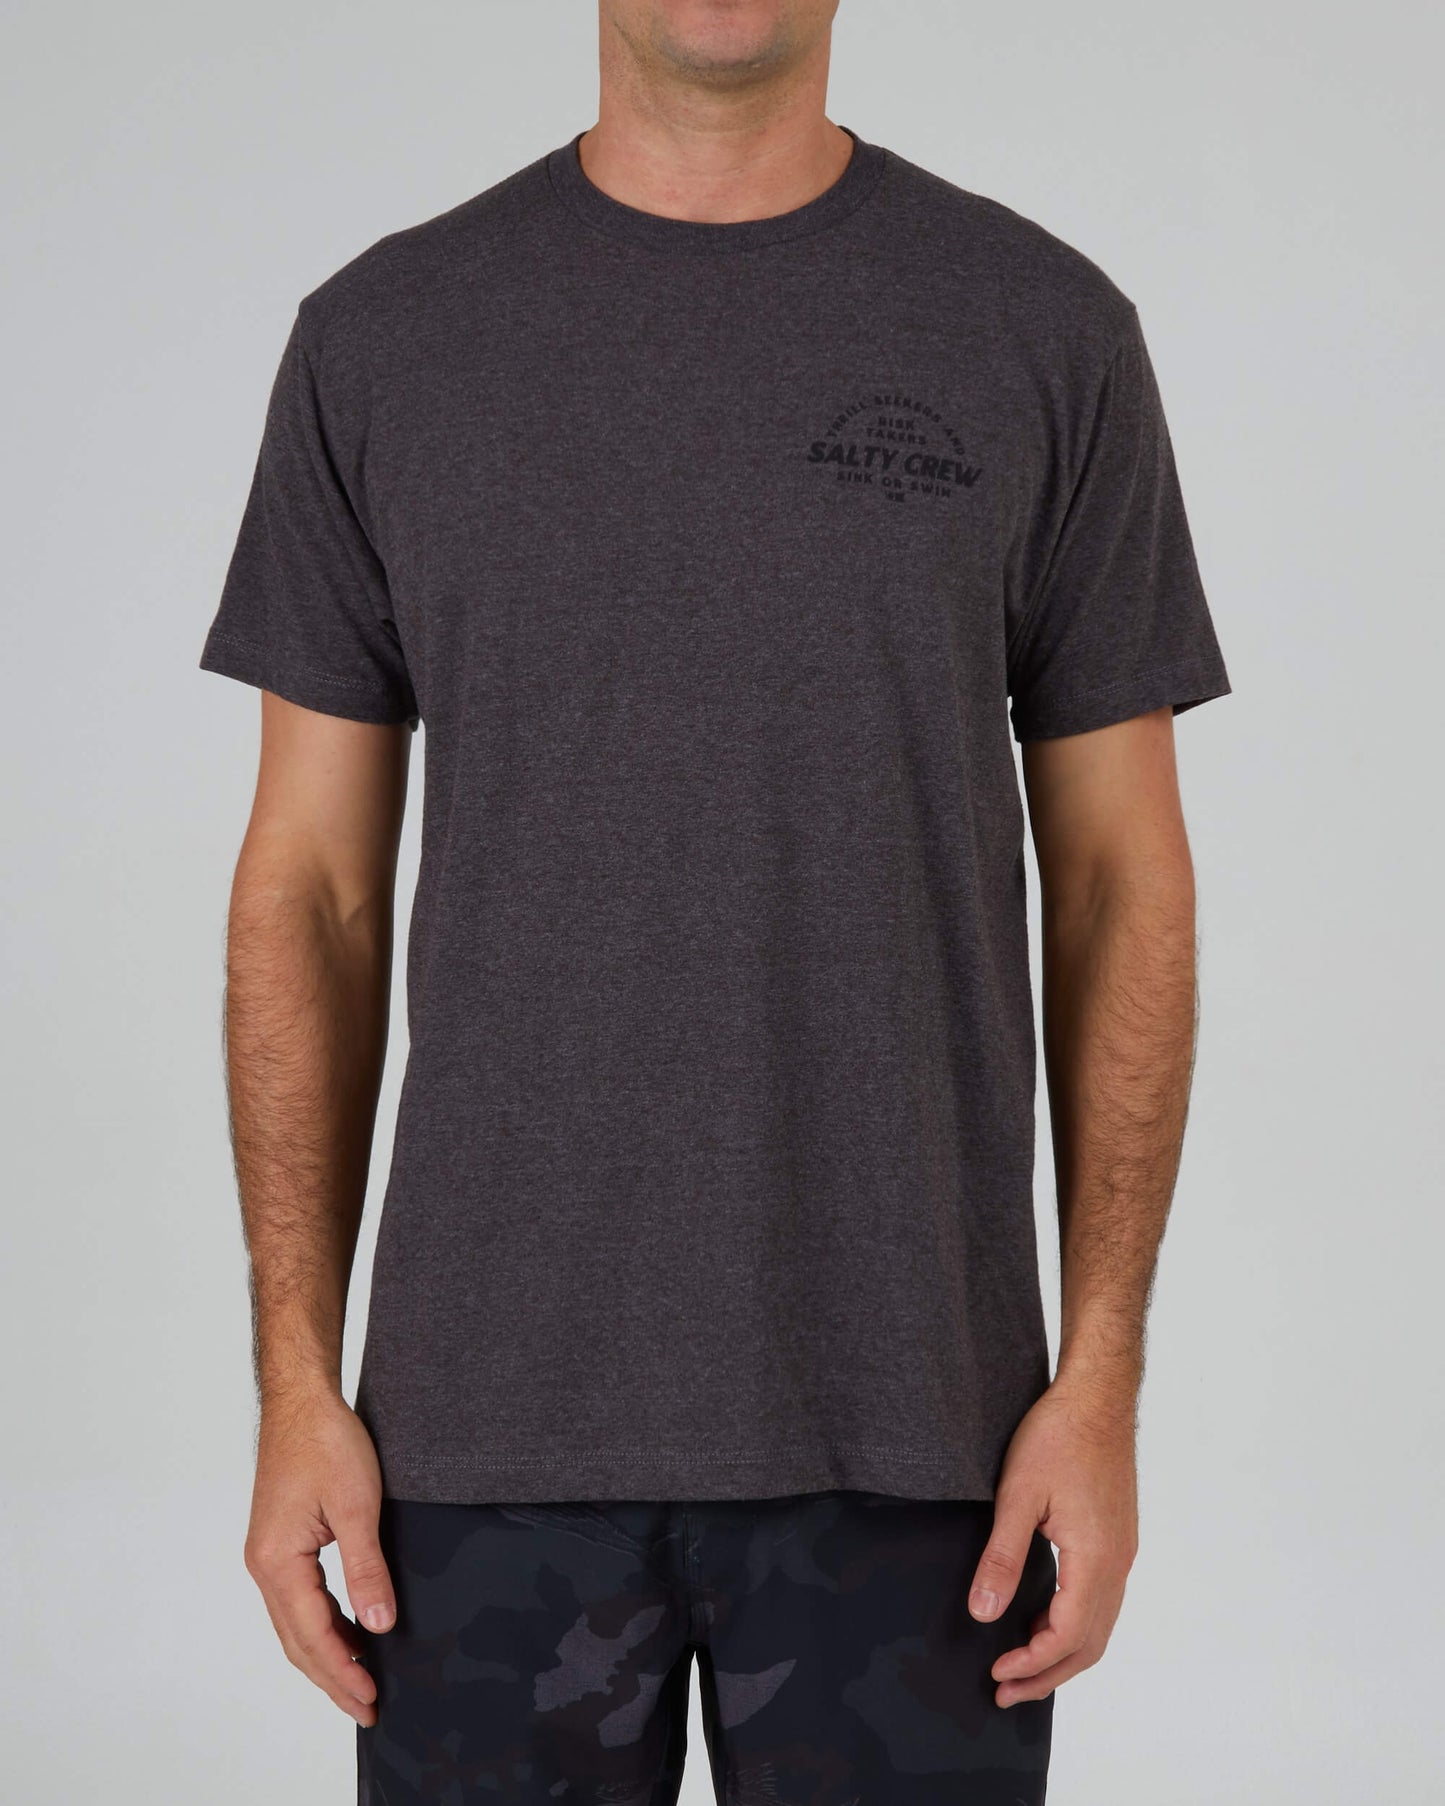 Salty Crew Hommes - Stoked Standard S/S Tee - Charcoal Heather